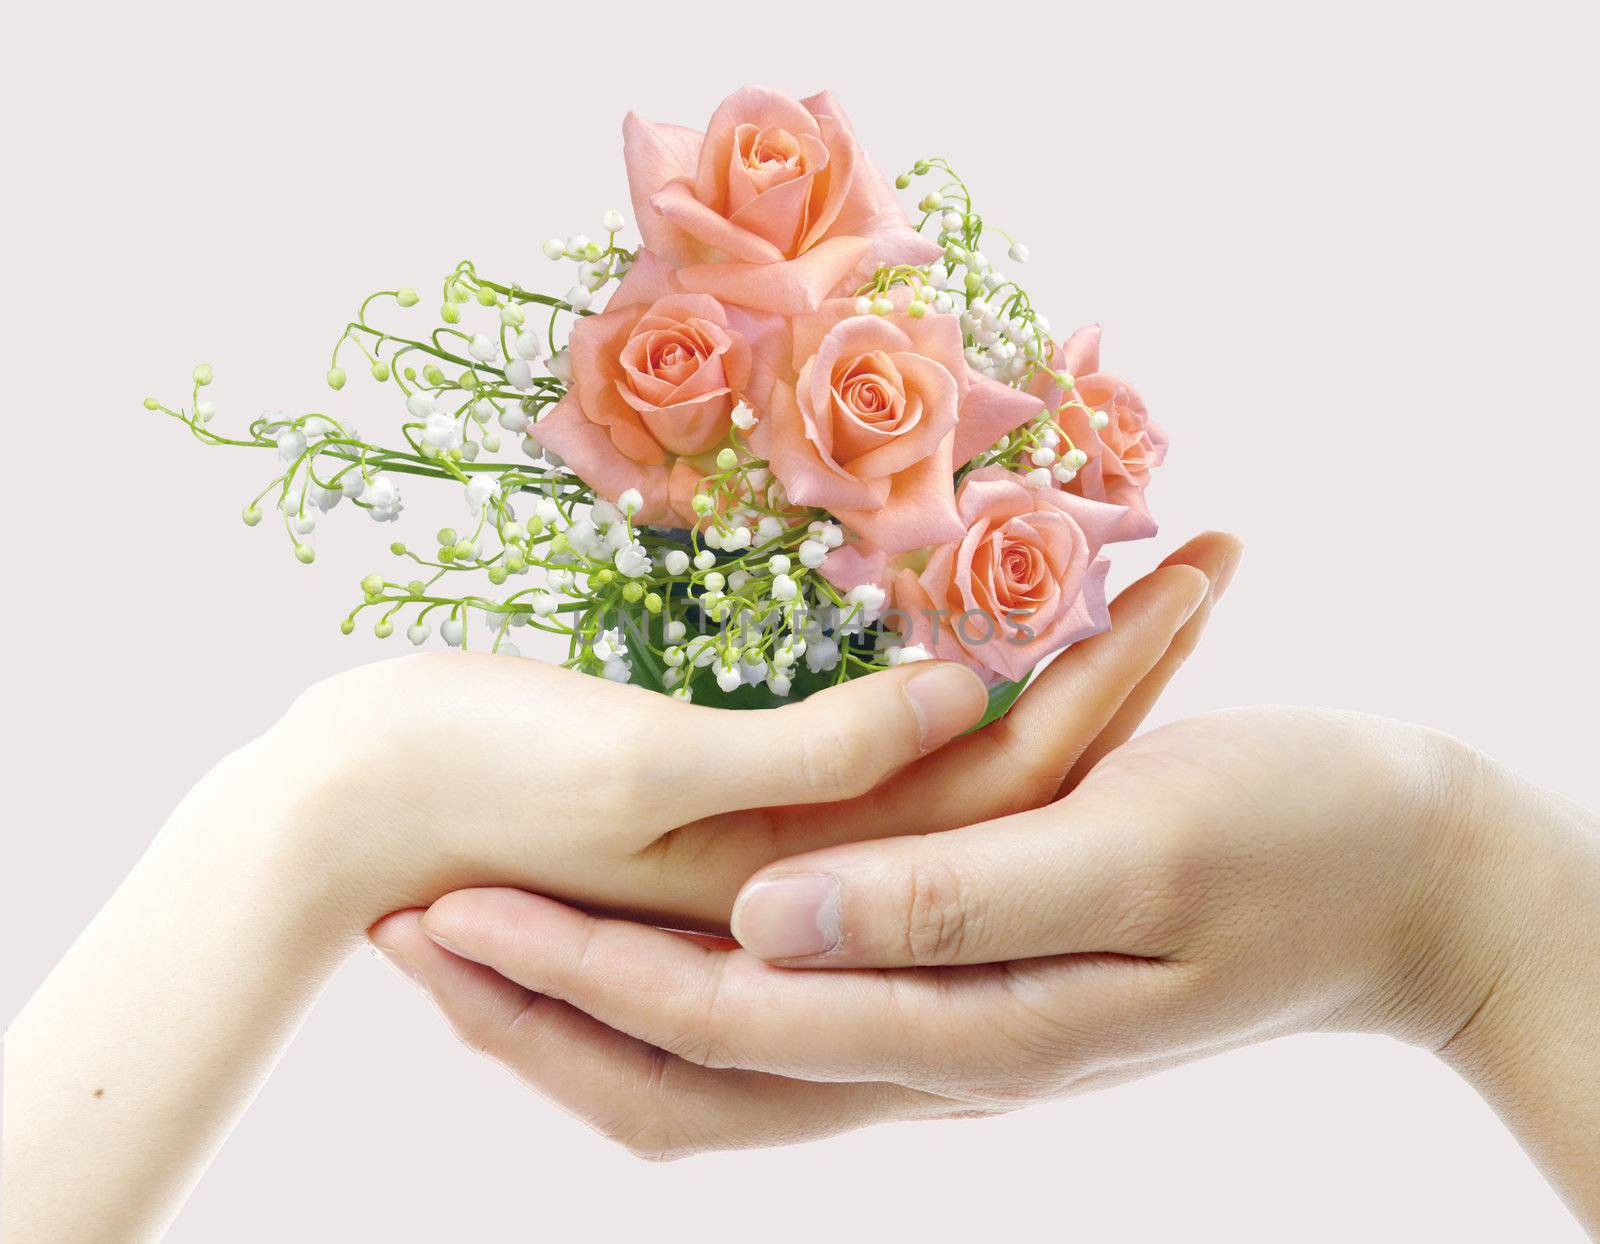 Hands and a bouquet by git